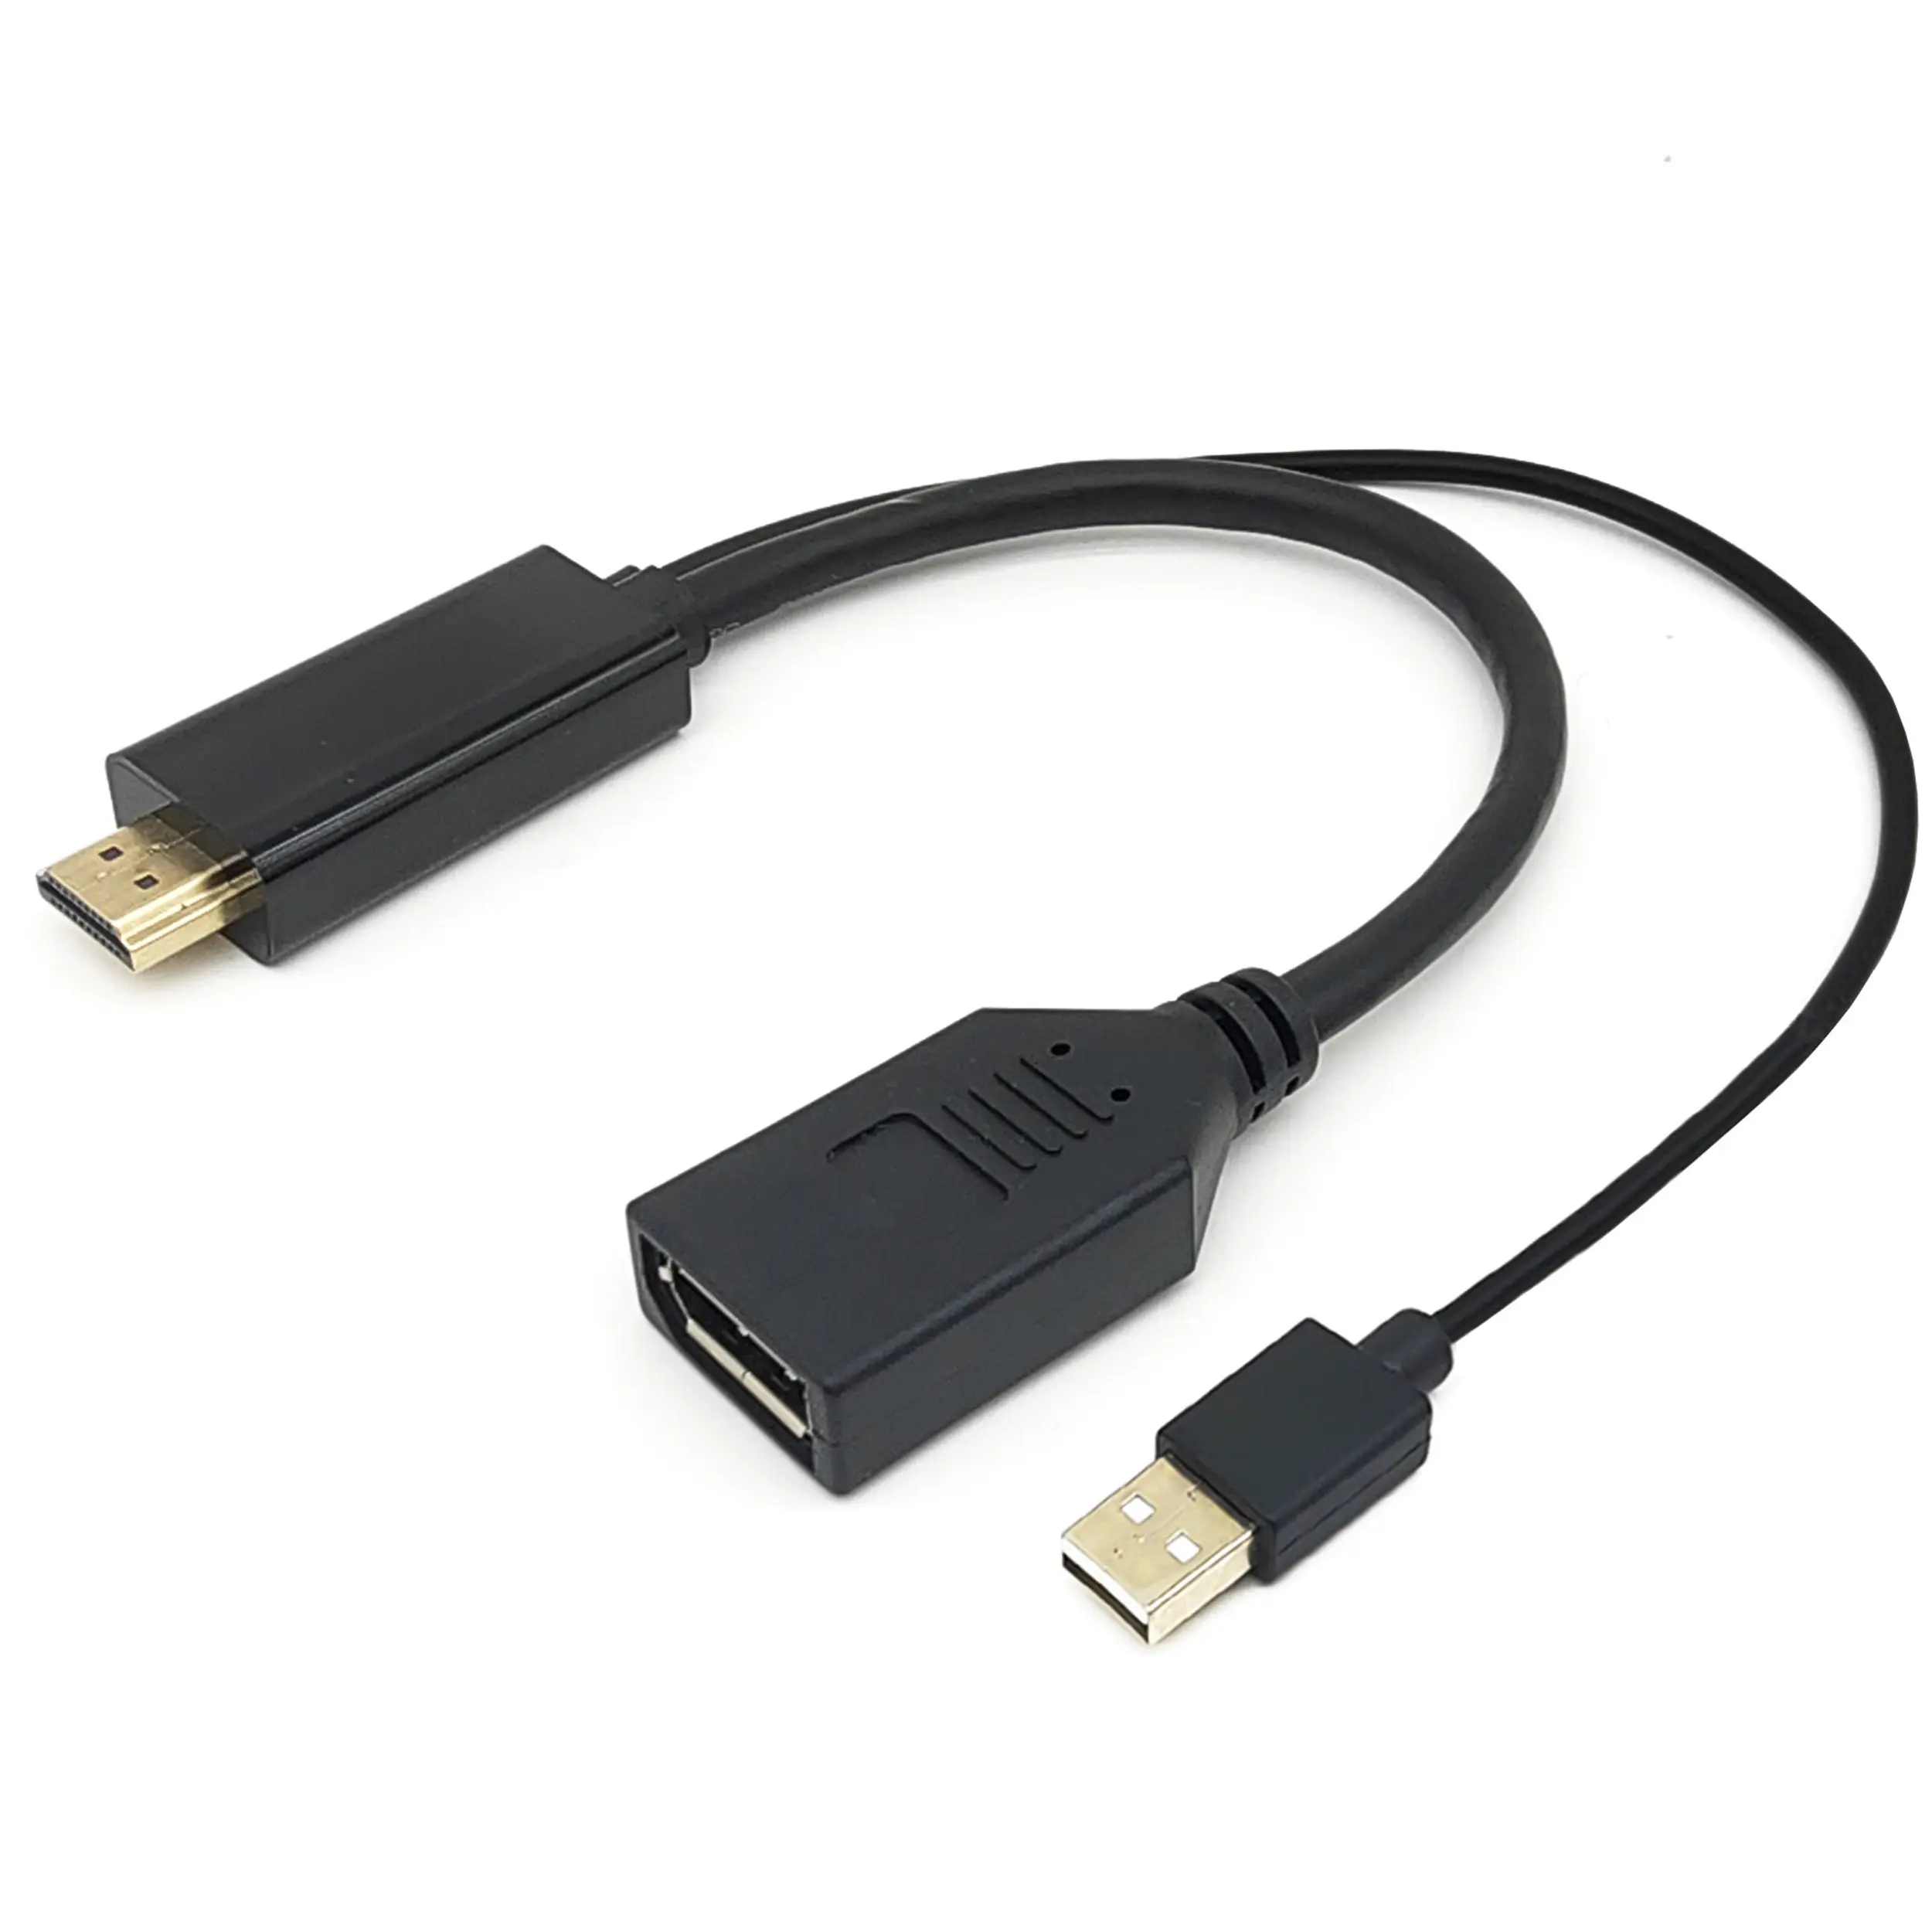 Usb To Hdmi Converter China Trade,Buy China Direct From Usb To 